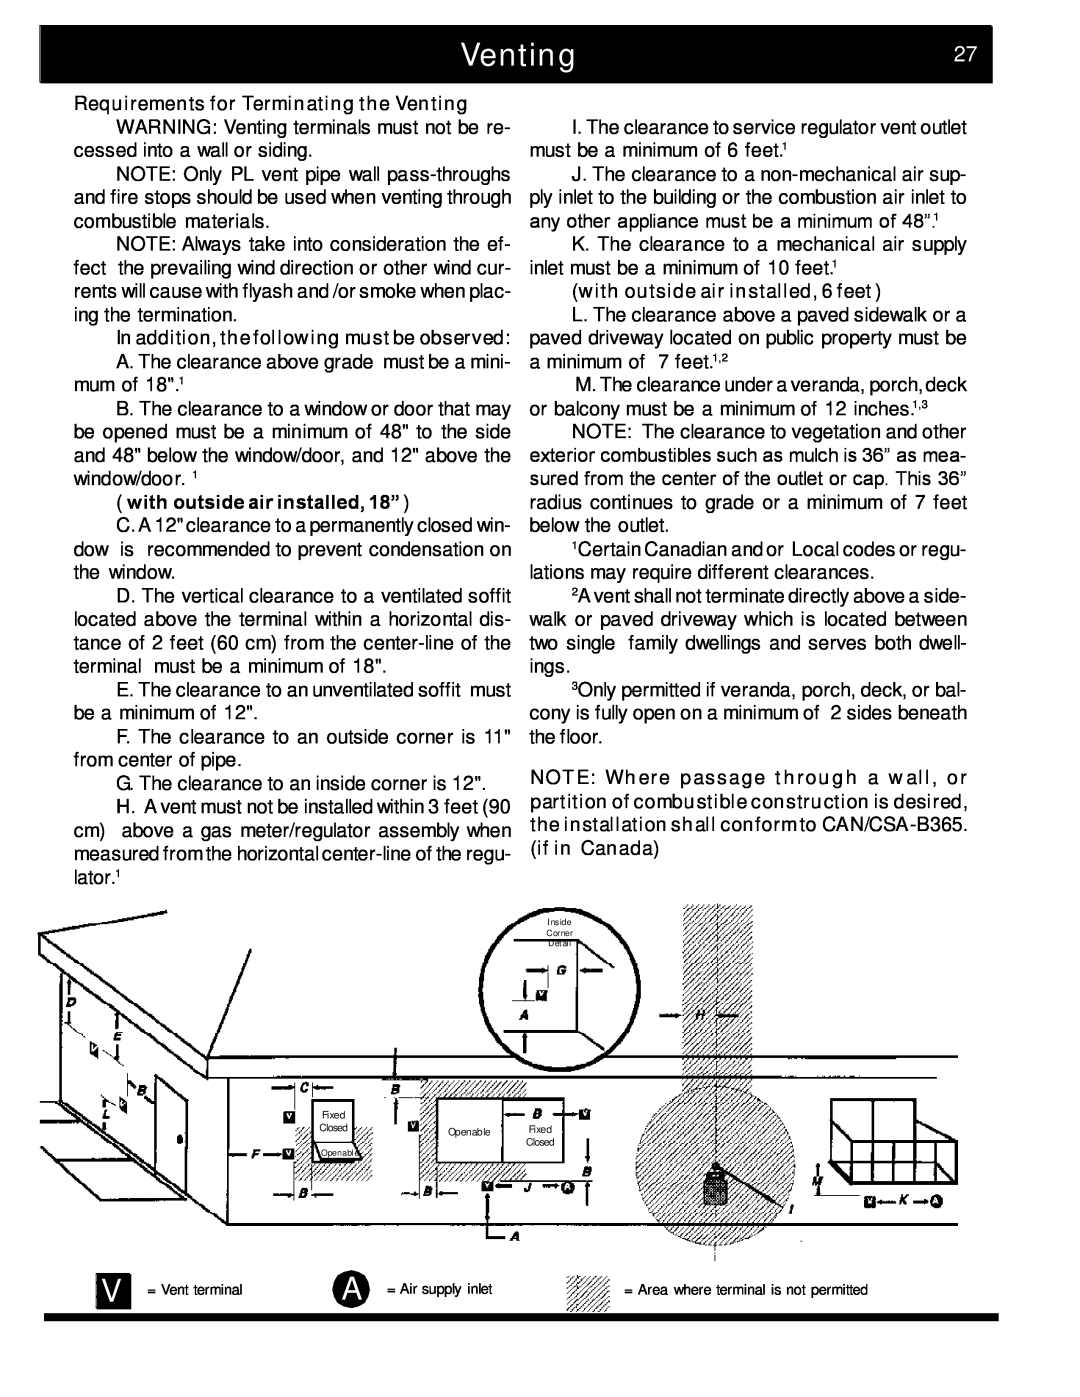 Harman Stove Company The Harman Accentra Pellet Insert manual Venting27, with outside air installed, 18” 